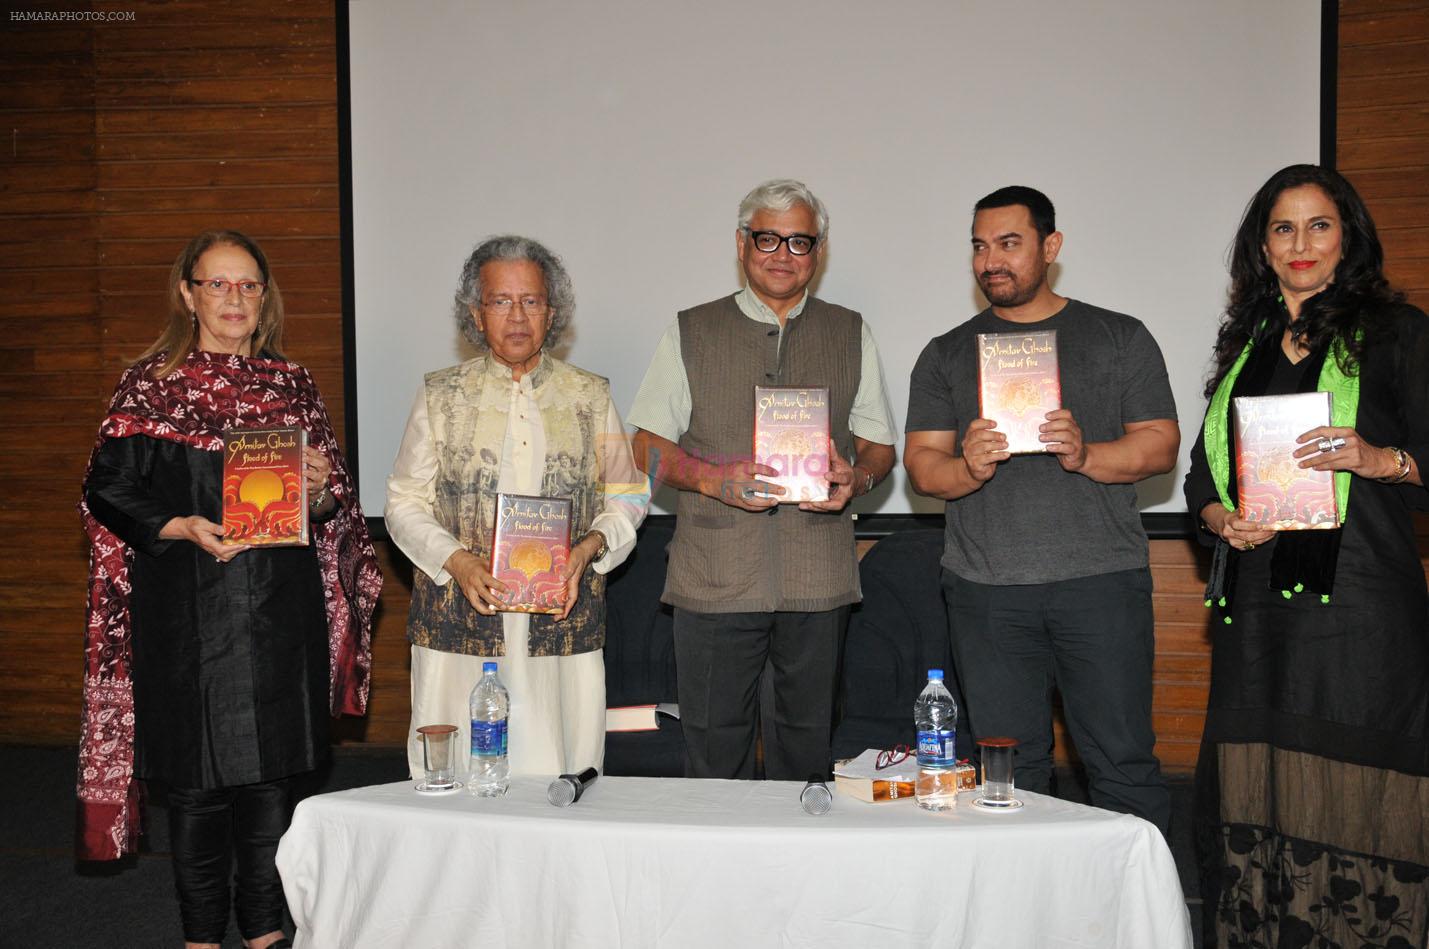 Aamir Khan at the launch of Amitav Ghosh's book on 16th June 2015